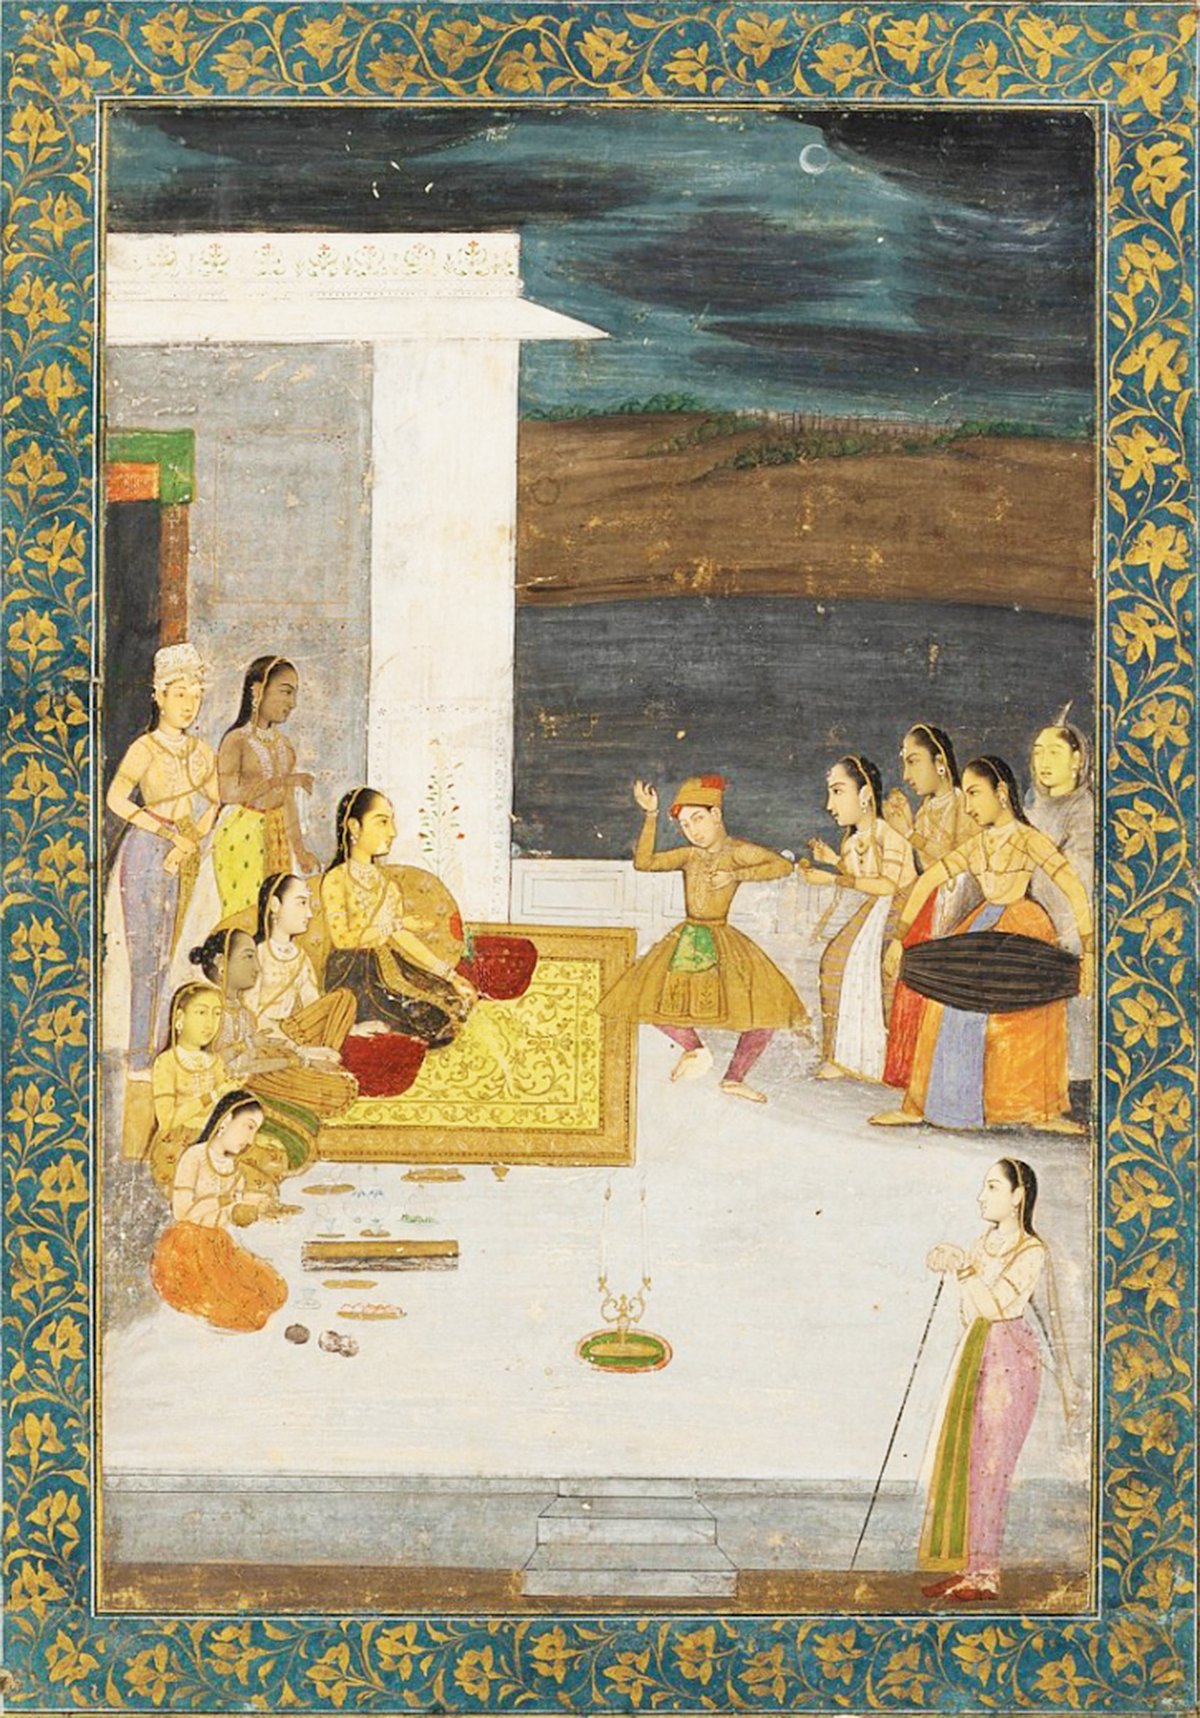 A painting from the early 18th century Mughal Dynasty, illustrating a scene where a princess is entertained by a dancer. The image captures the princess seated on a lavish carpet, surrounded by attendants and musicians in a spacious terrace under a night sky. The setting is framed by a detailed floral border, adding to the richness of the scene.